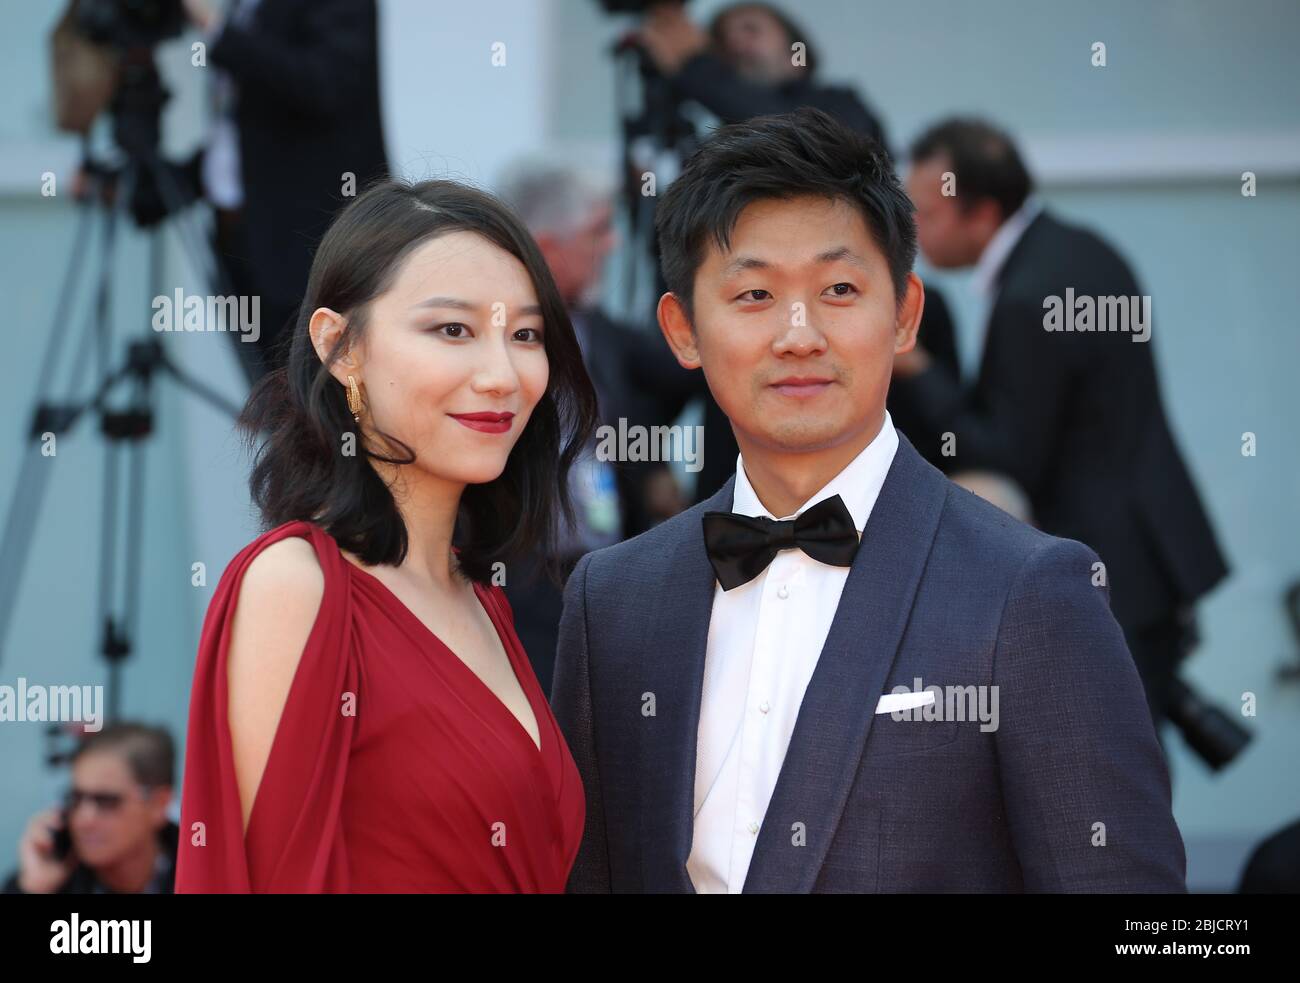 VENICE, ITALY - SEPTEMBER 09: (L-R) Ying Zei and Pengfei walks the red carpet ahead the Award Ceremony of the 74th Venice Film Festival Stock Photo